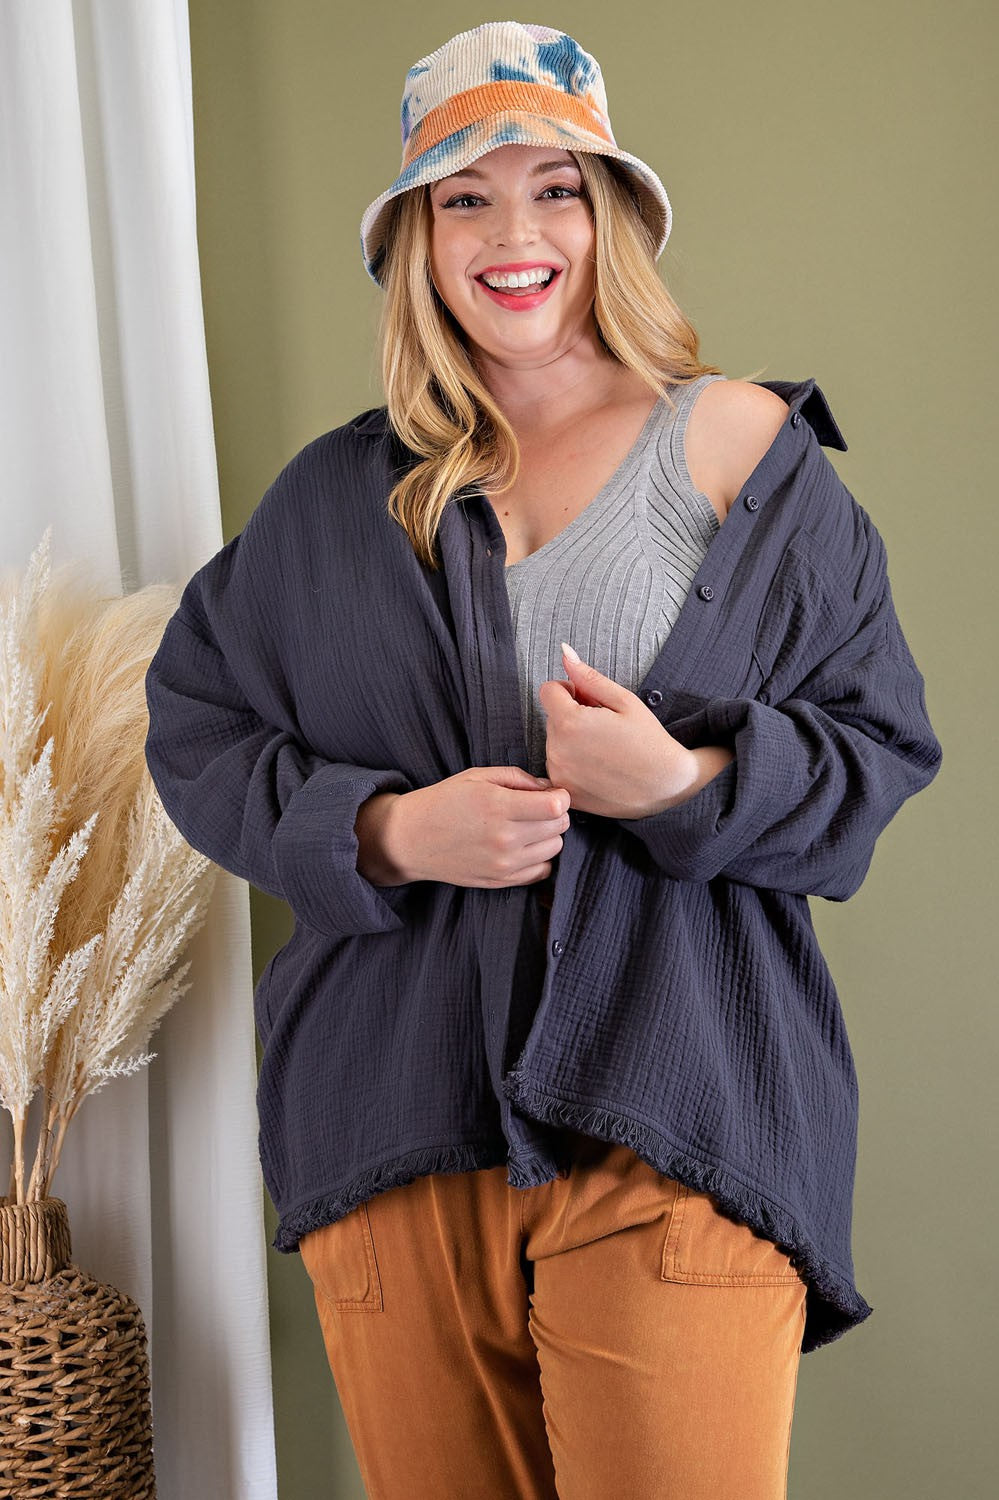 Kelli Oversized Gauze Button Down Top in Charcoal